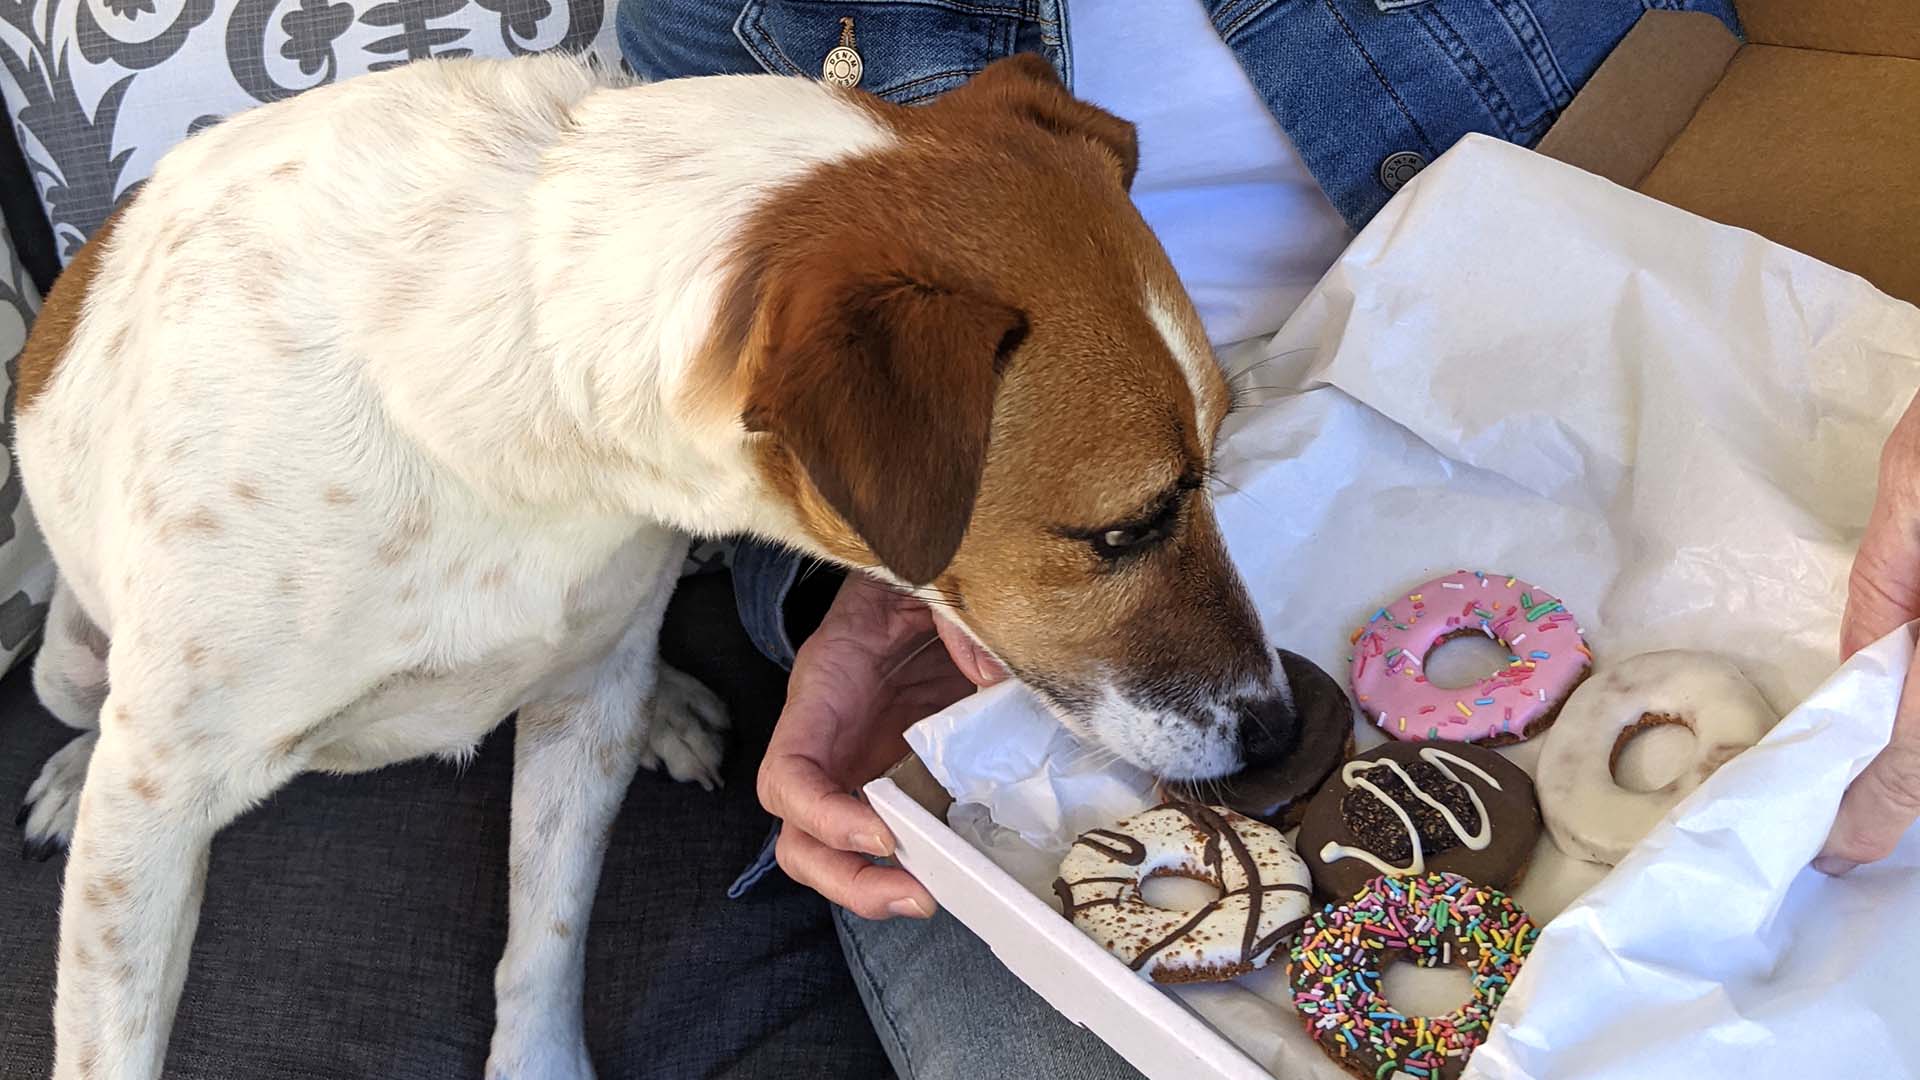 Krispy Kreme Has Just Released a Limited-Edition Range of Doughnut-Inspired Dog Biscuits